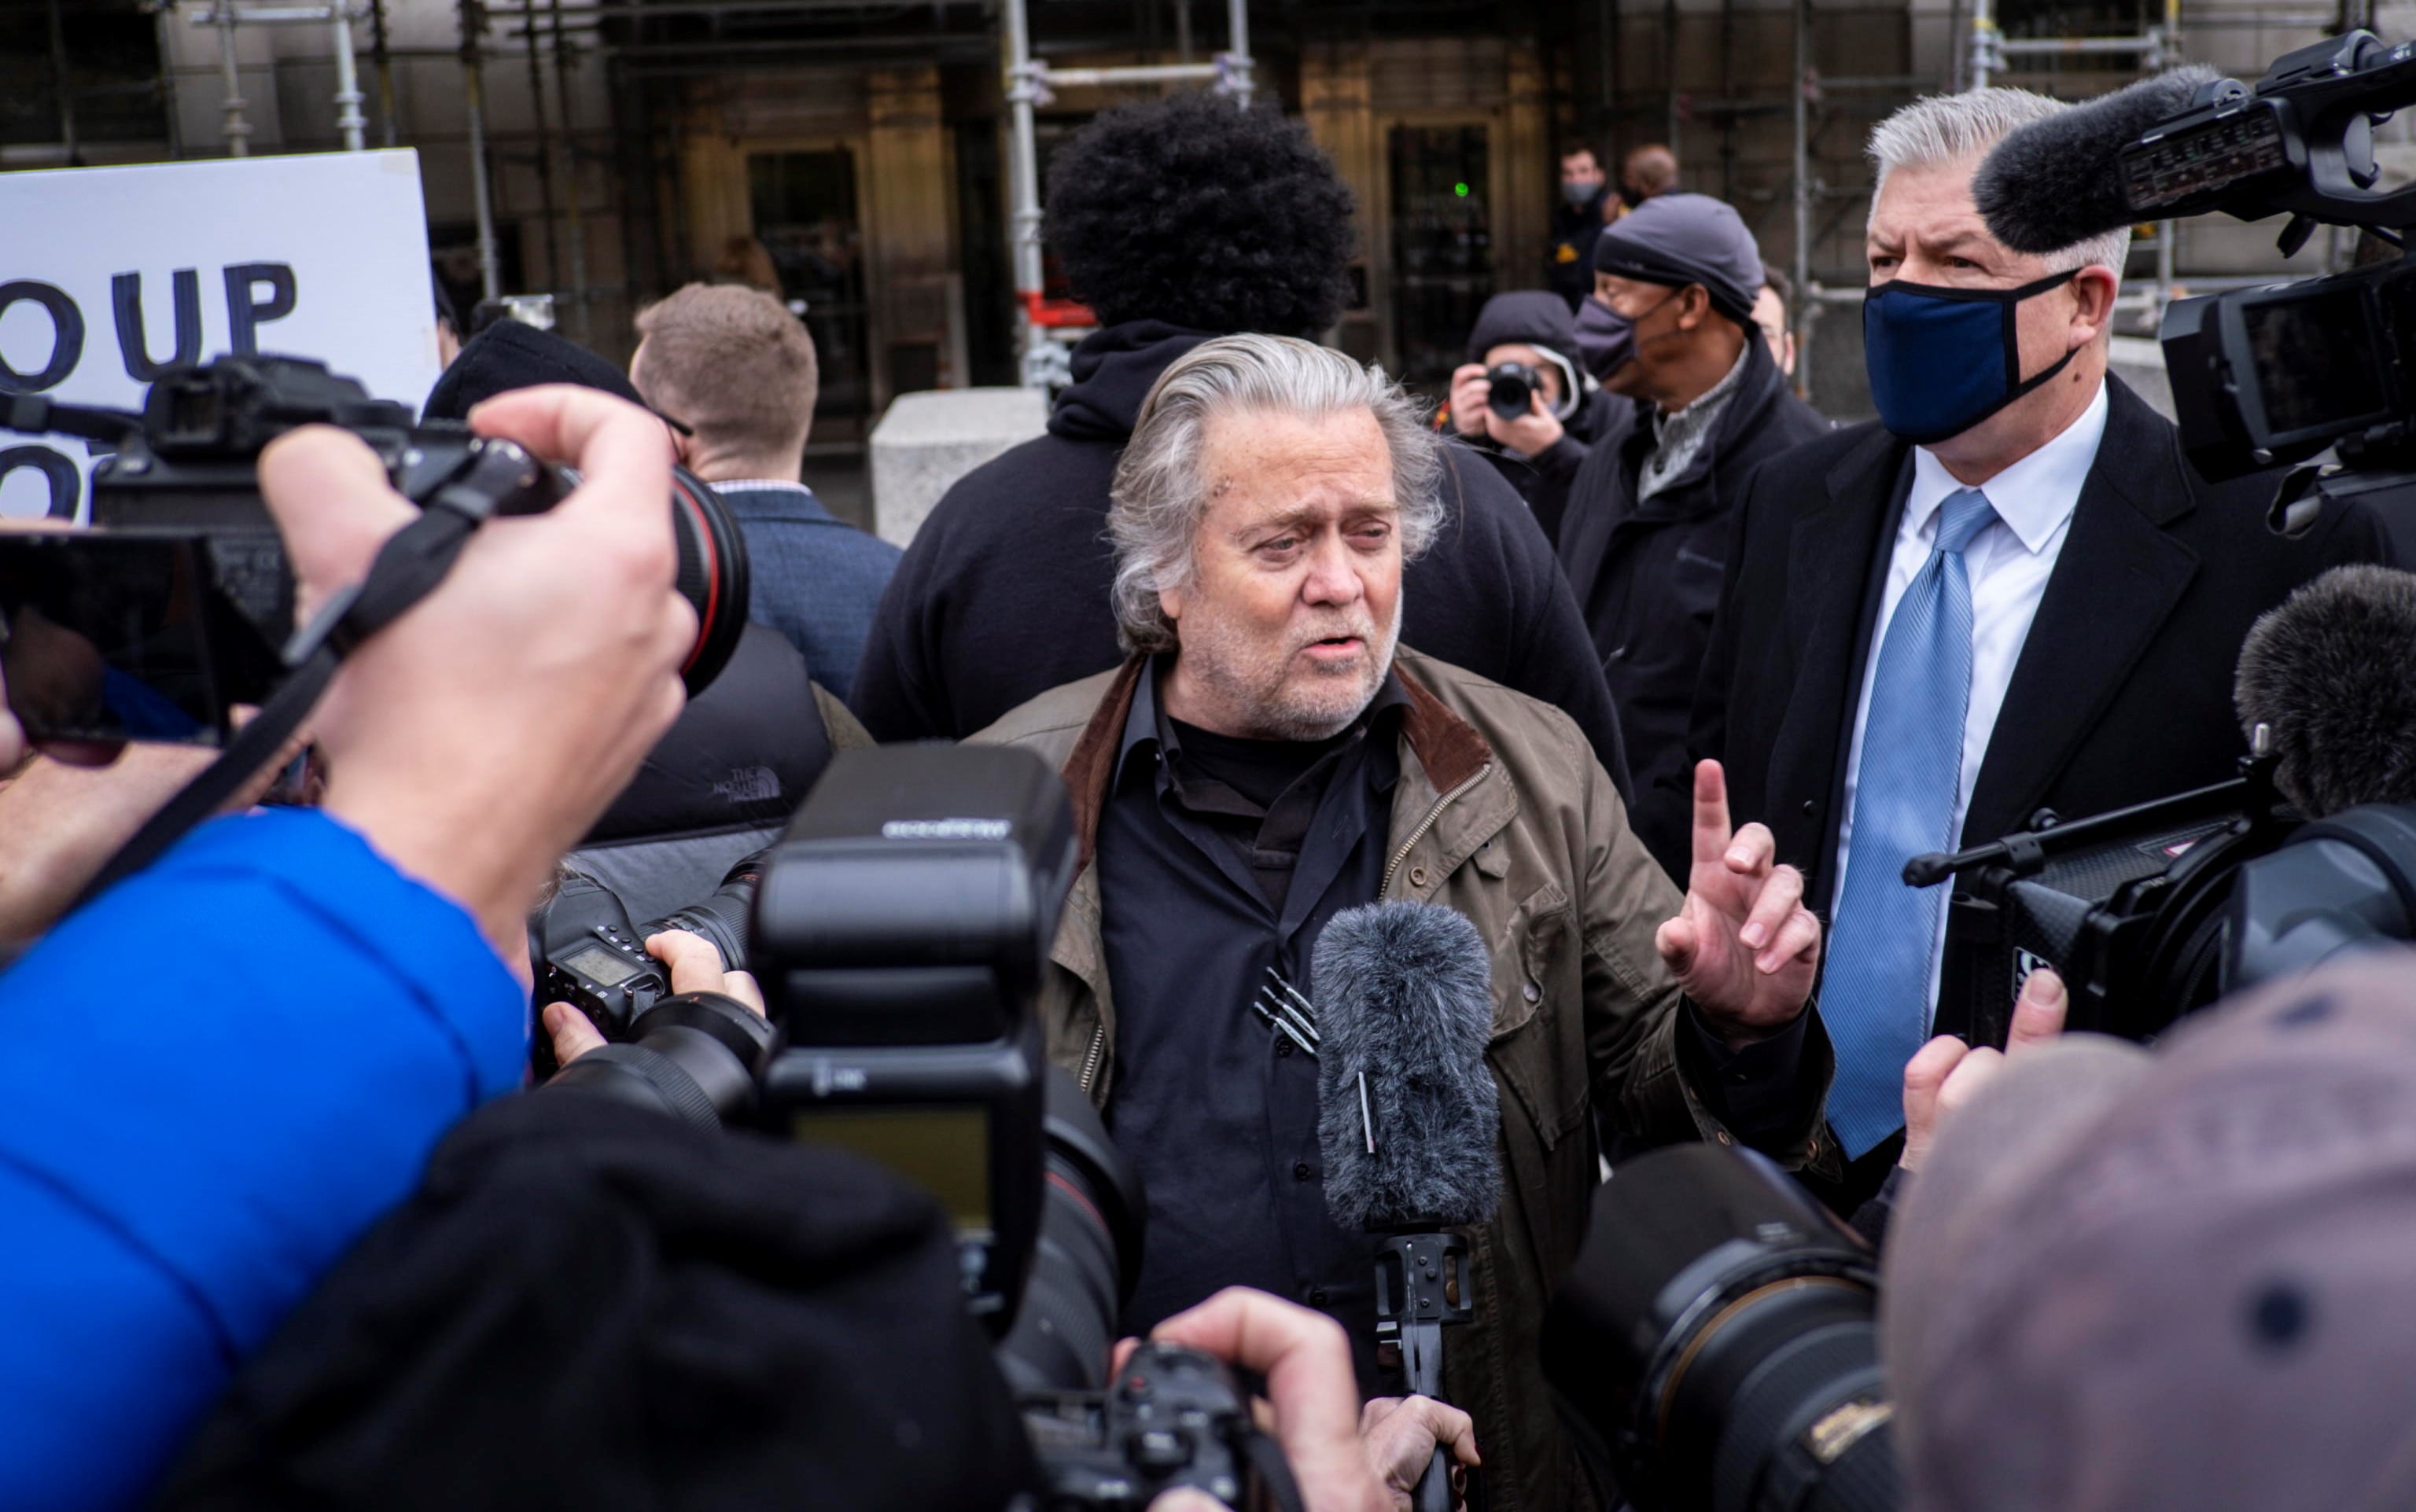 Usa, Bannon surrenders himself to the FBI: in recent days indicted for insulting Congress